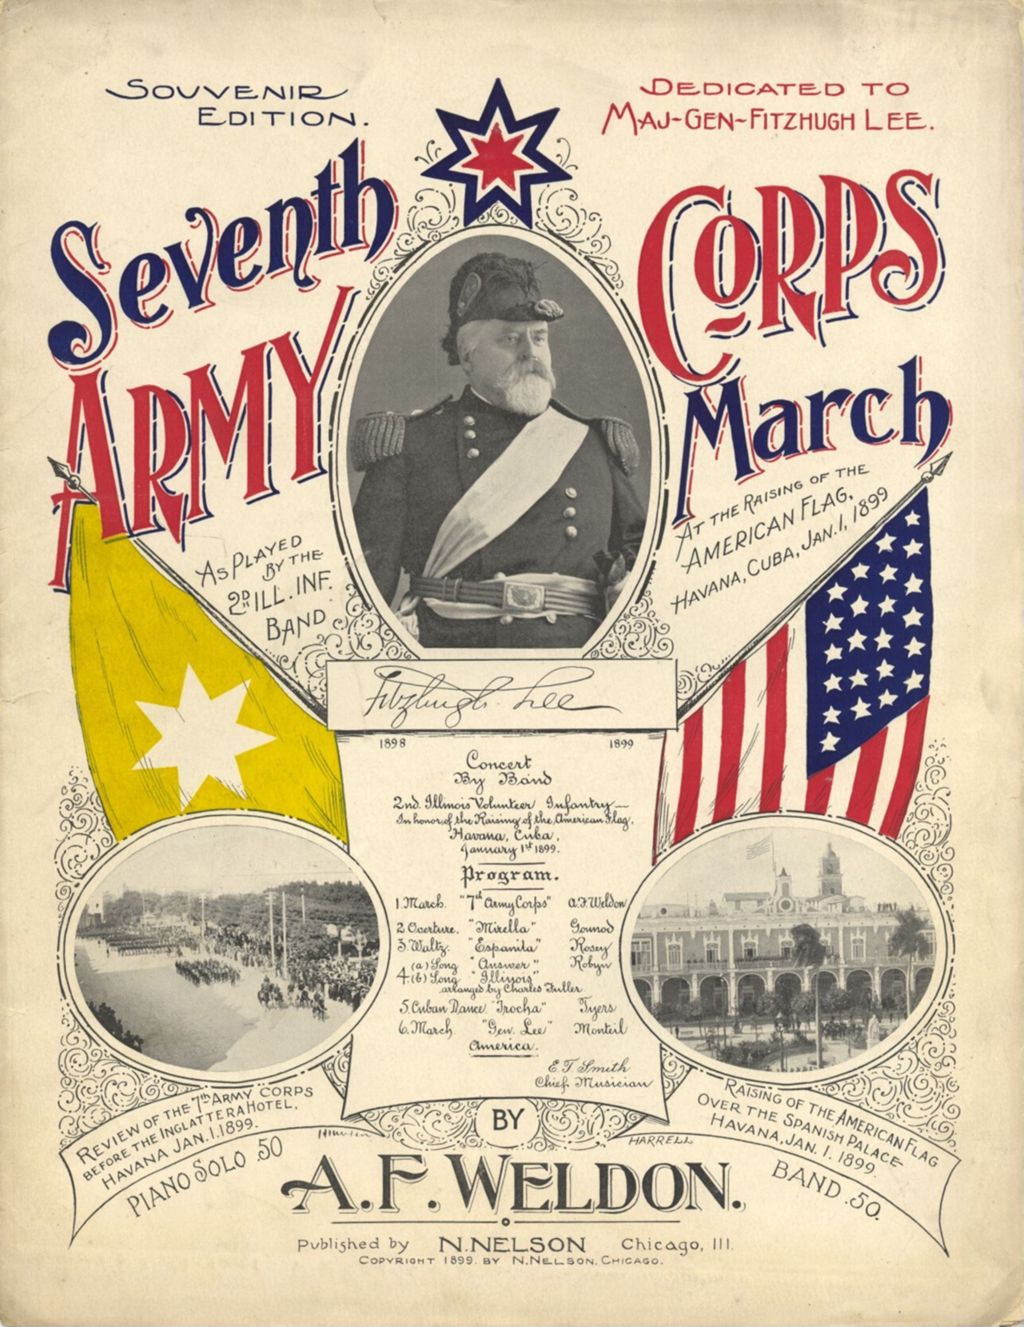 Miniature of Seventh Army Corps March